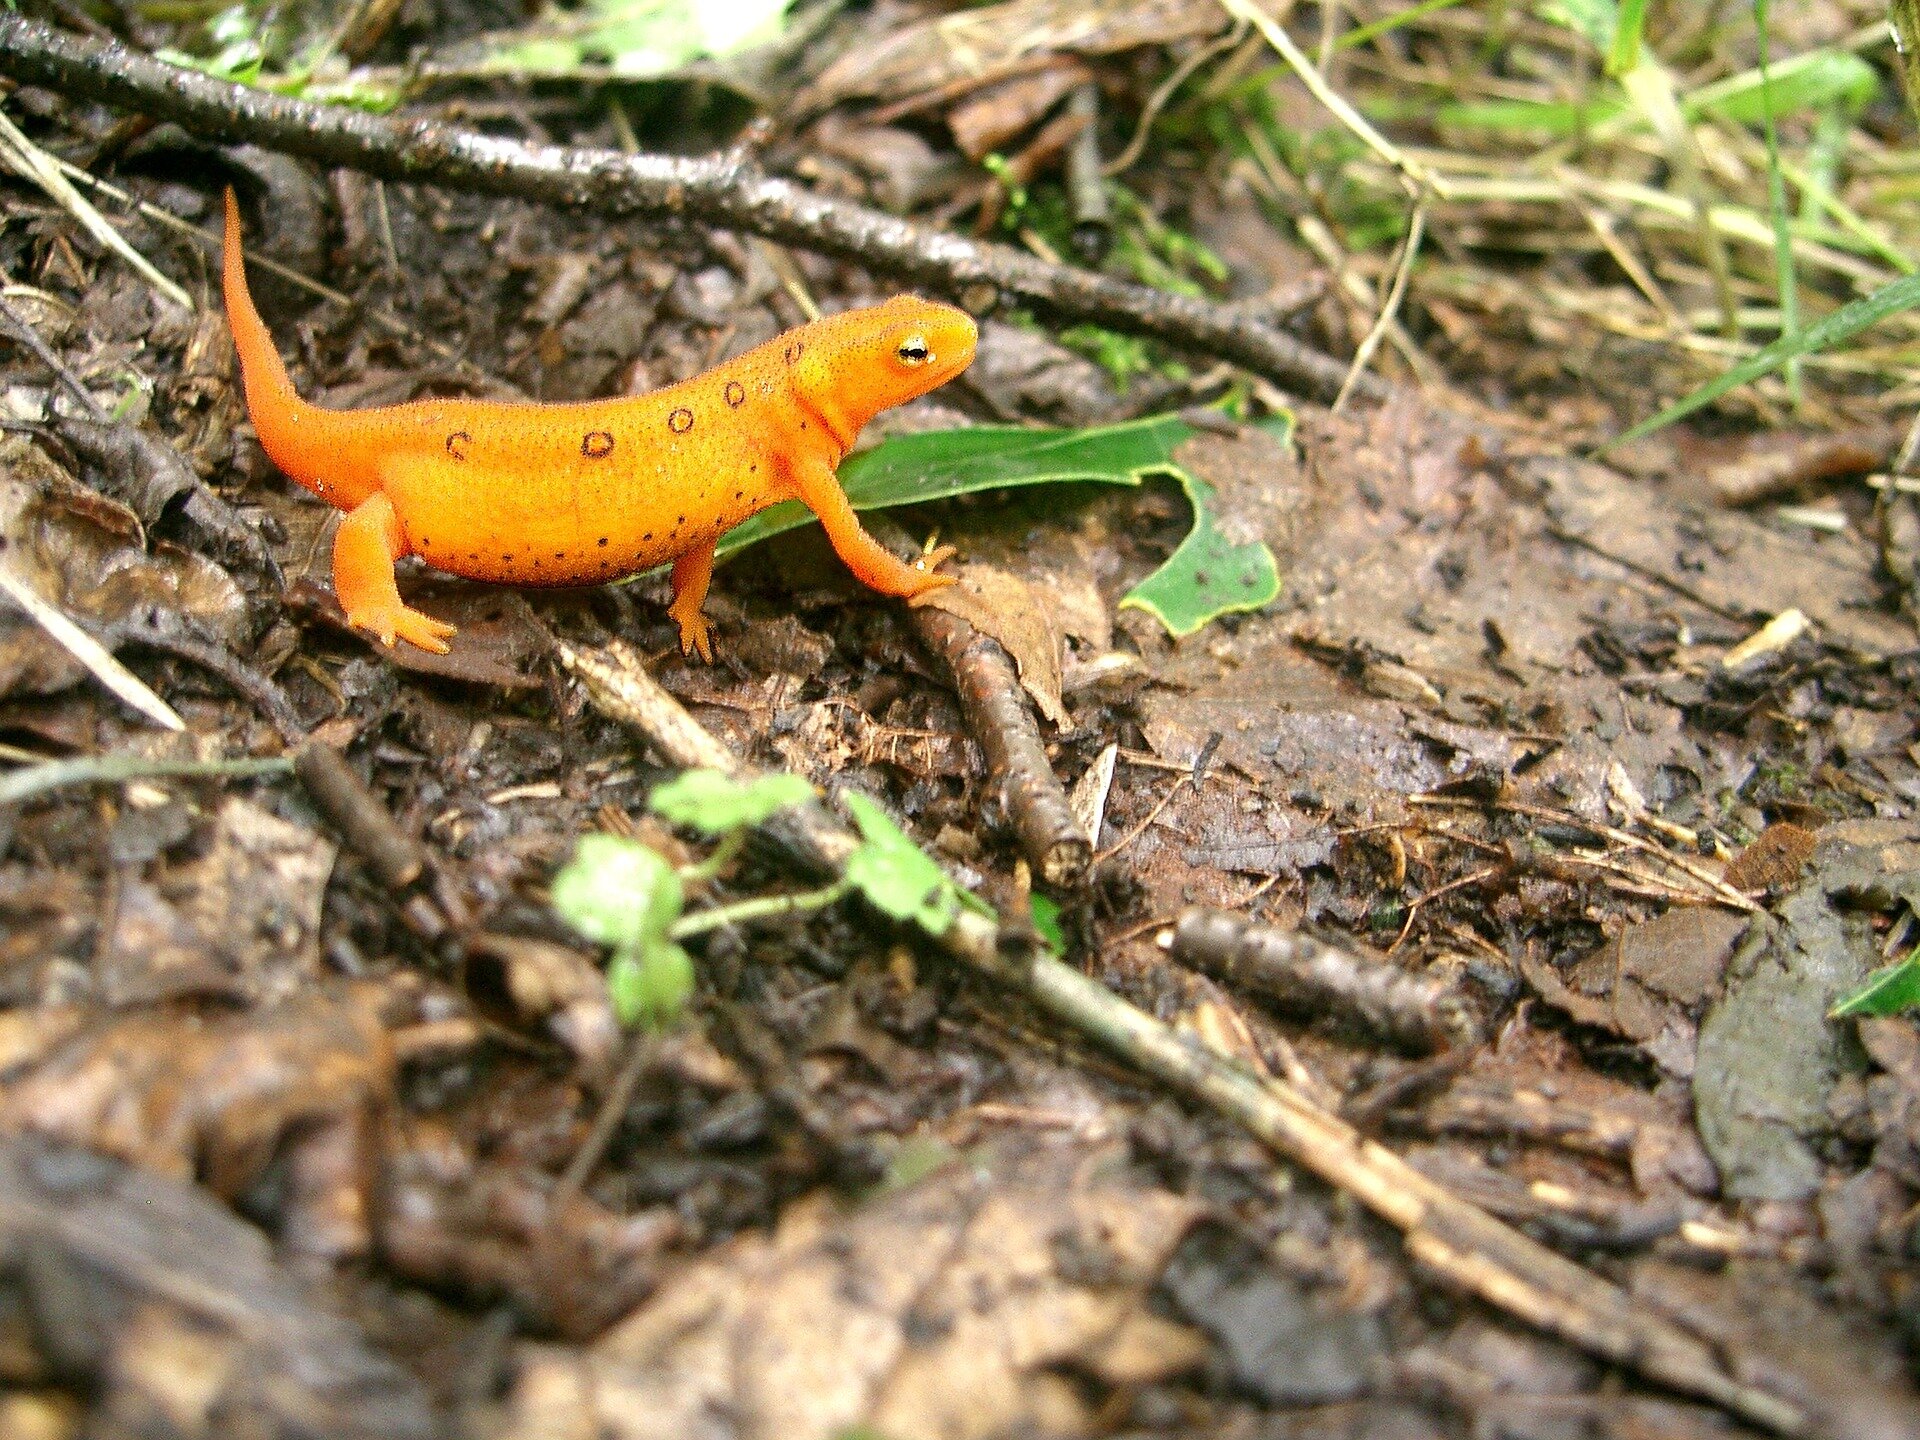 Temperature affects susceptibility of newts to skin-eating fungus